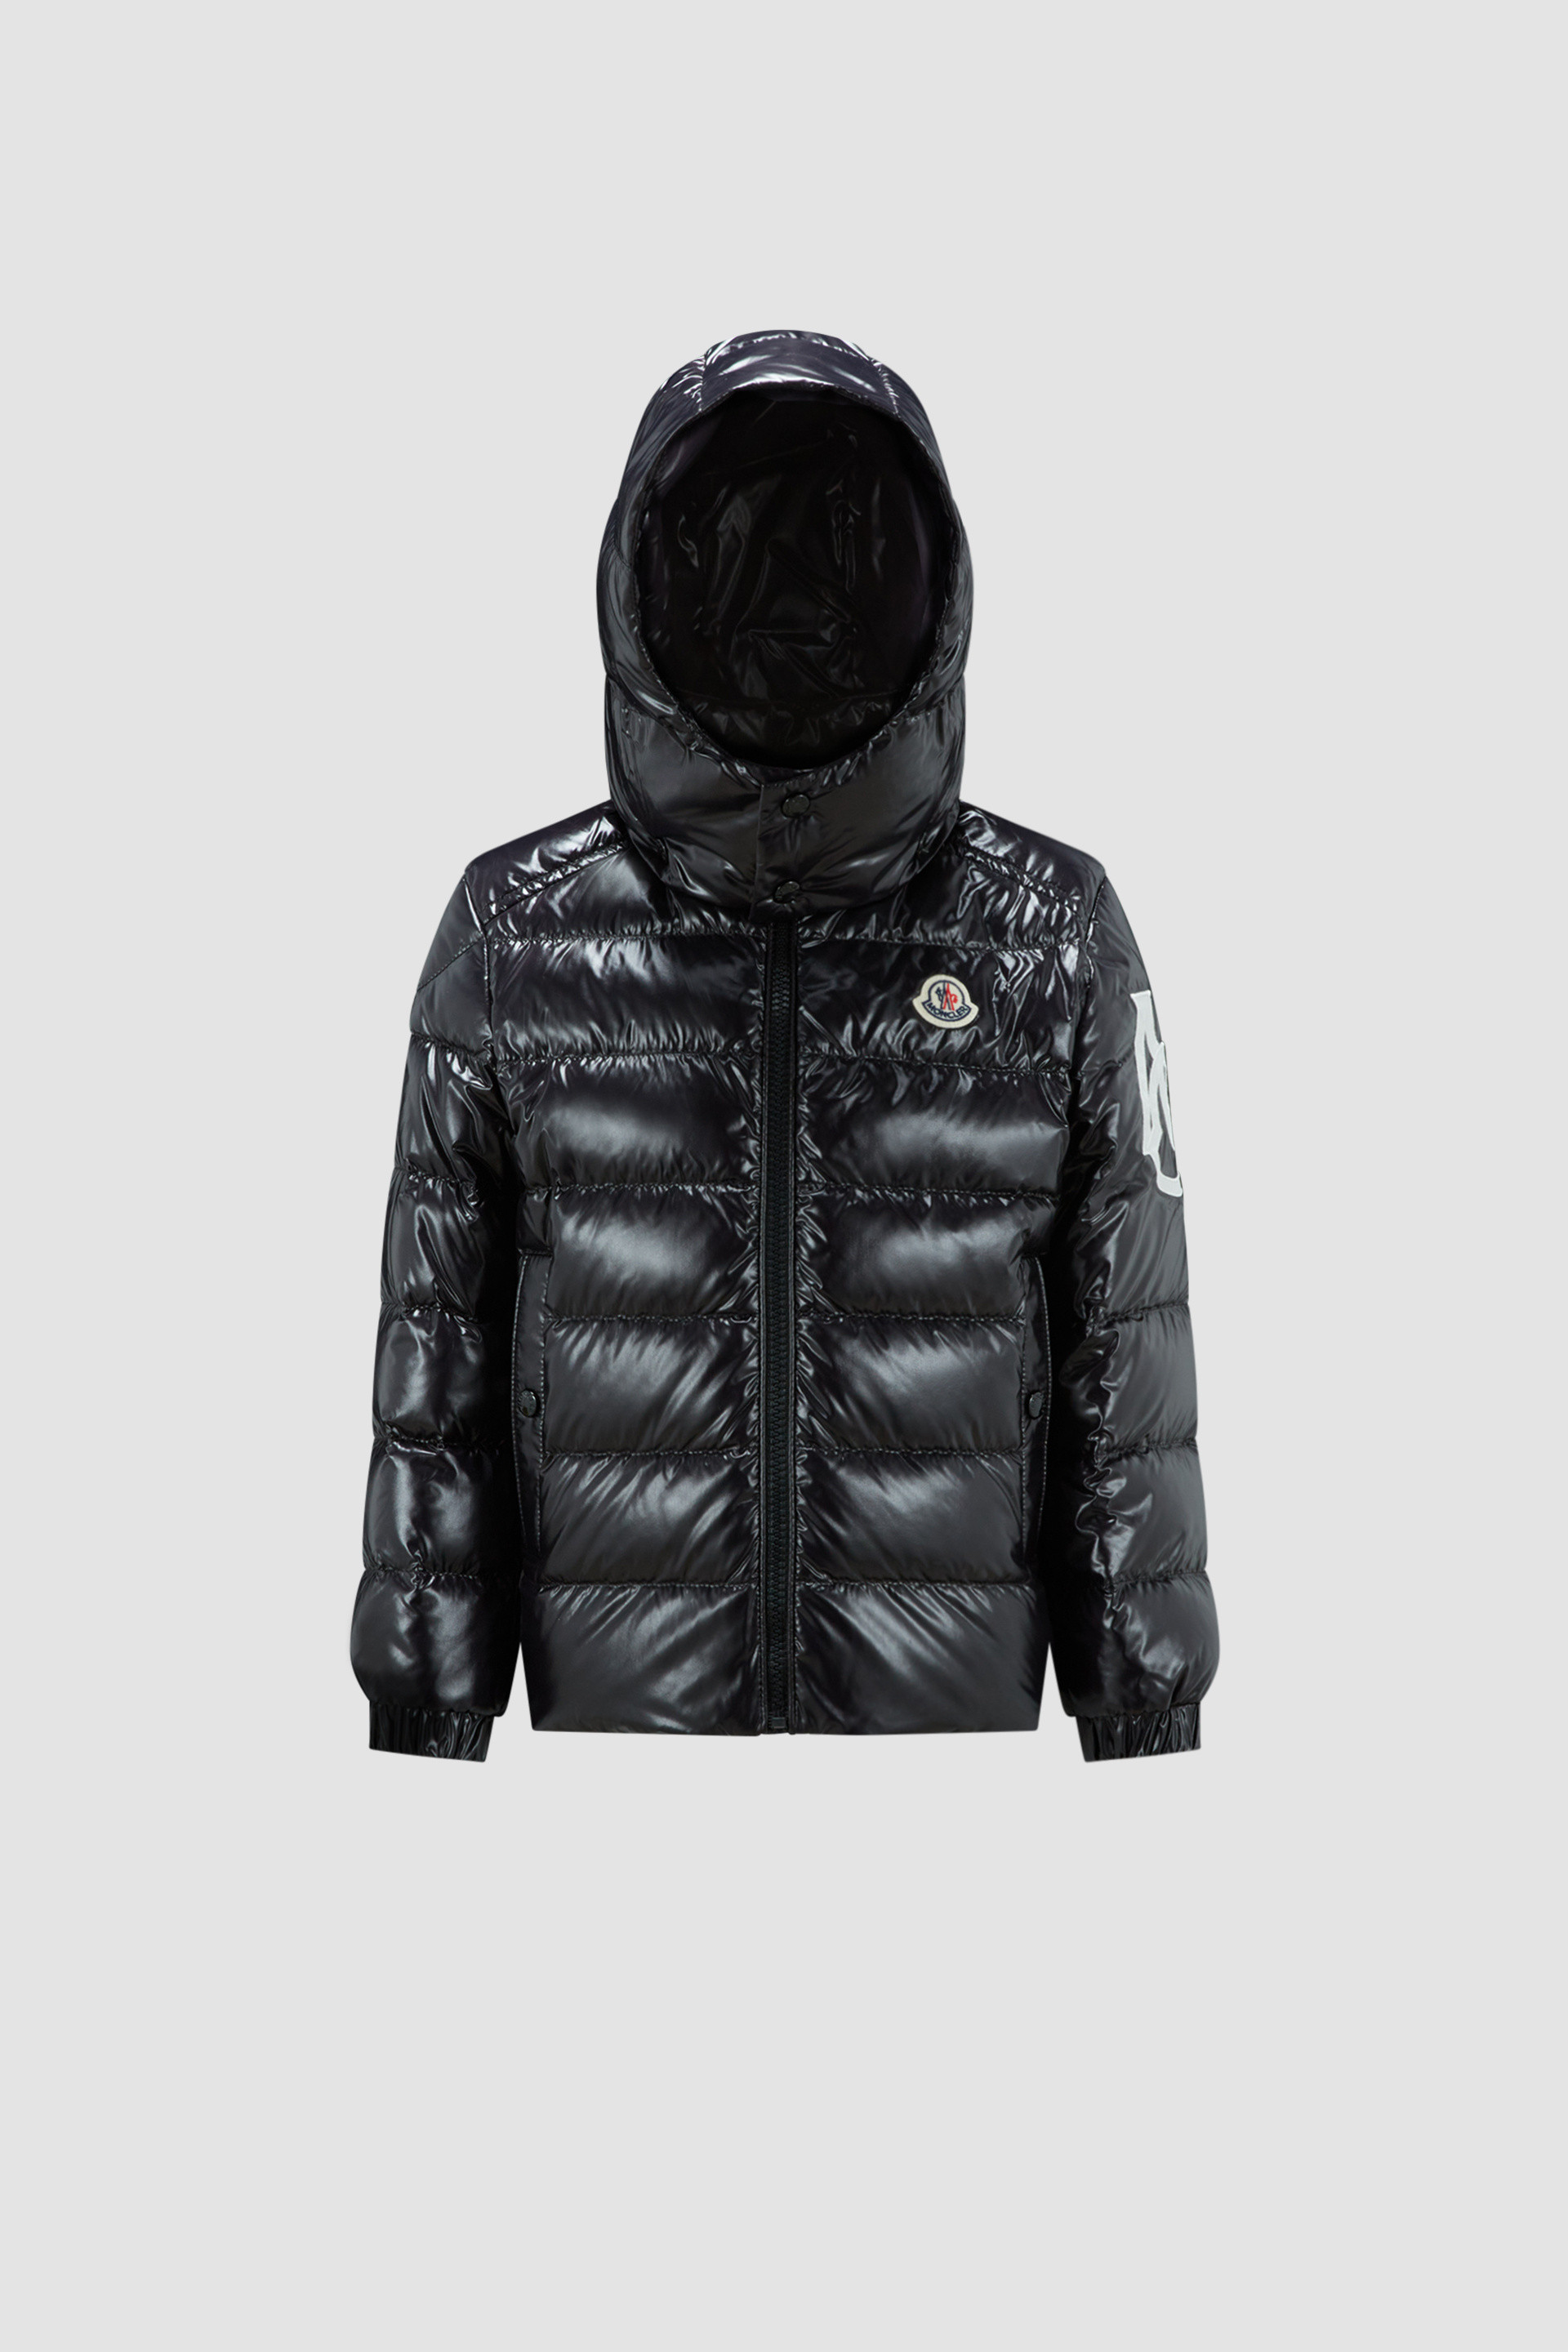 Boys' Clothing, Shoes & Accessories | Moncler UK